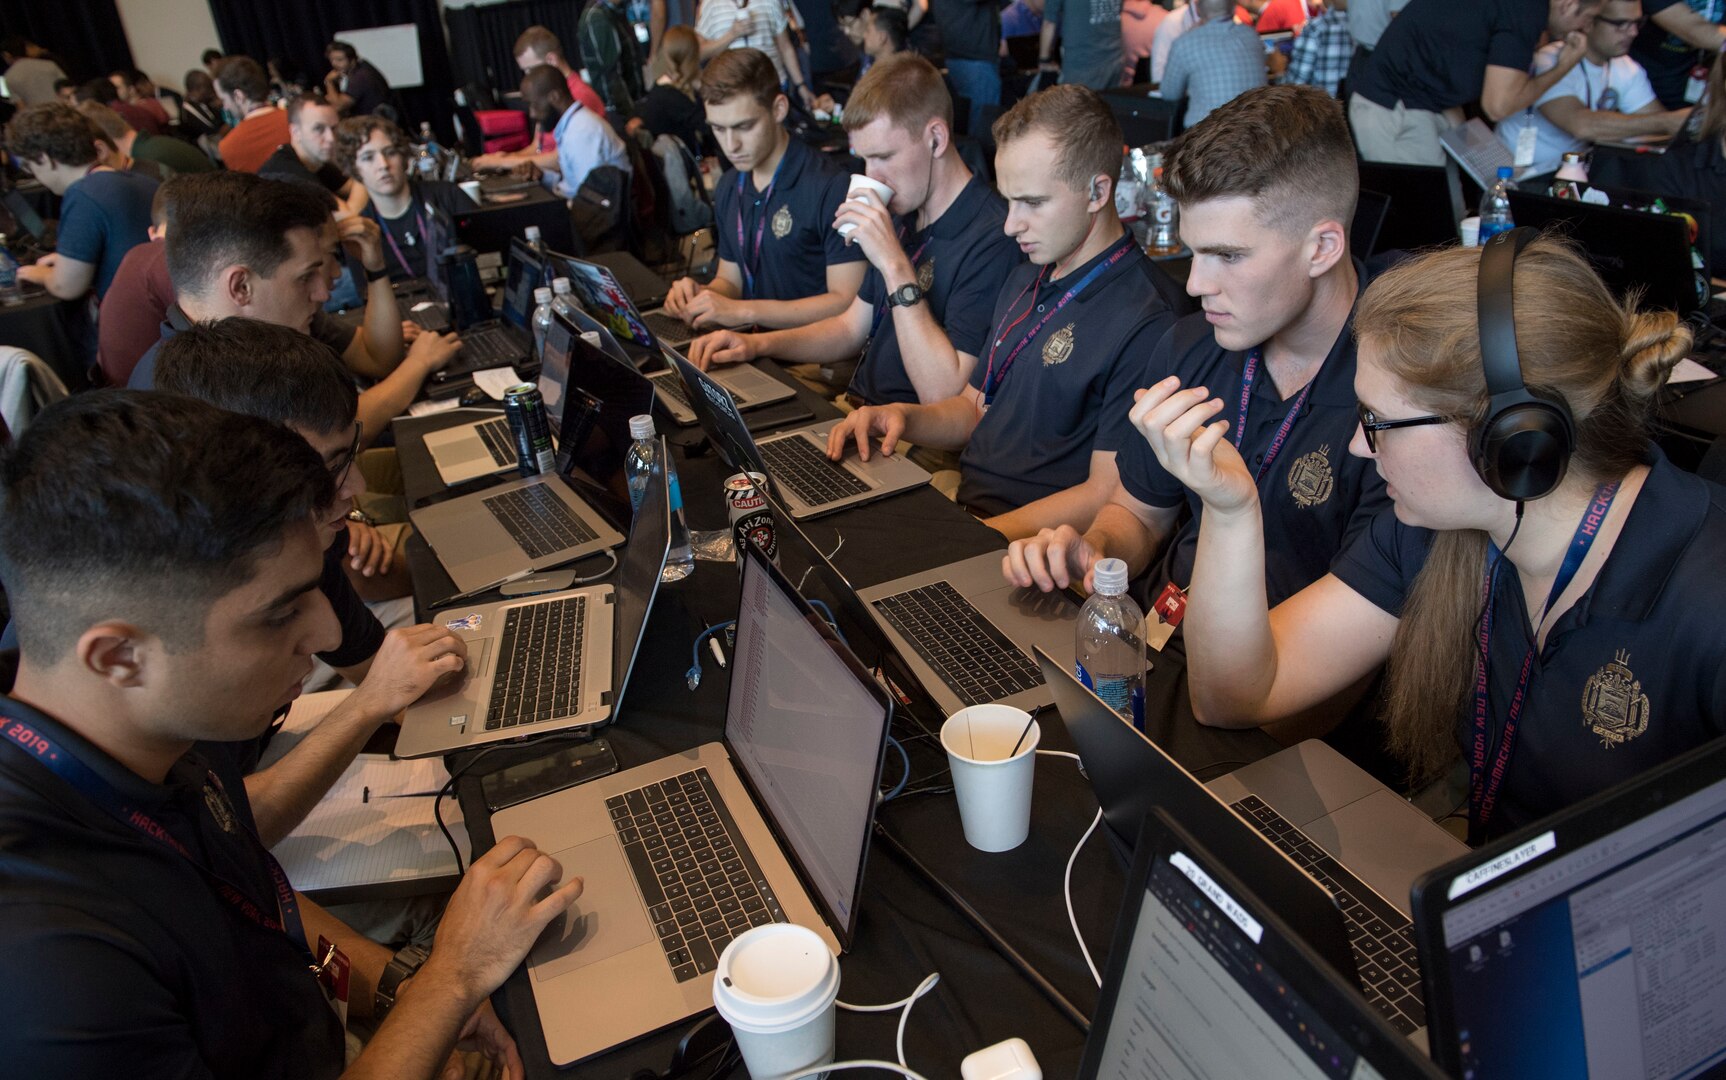 A team of Naval Midshipmen and Air Force Airmen from the Naval Academy and Air Force Academy participate in track one during HacktheMachine competition at the Brooklyn Navy Yard in New York City, Sept. 7, 2019.